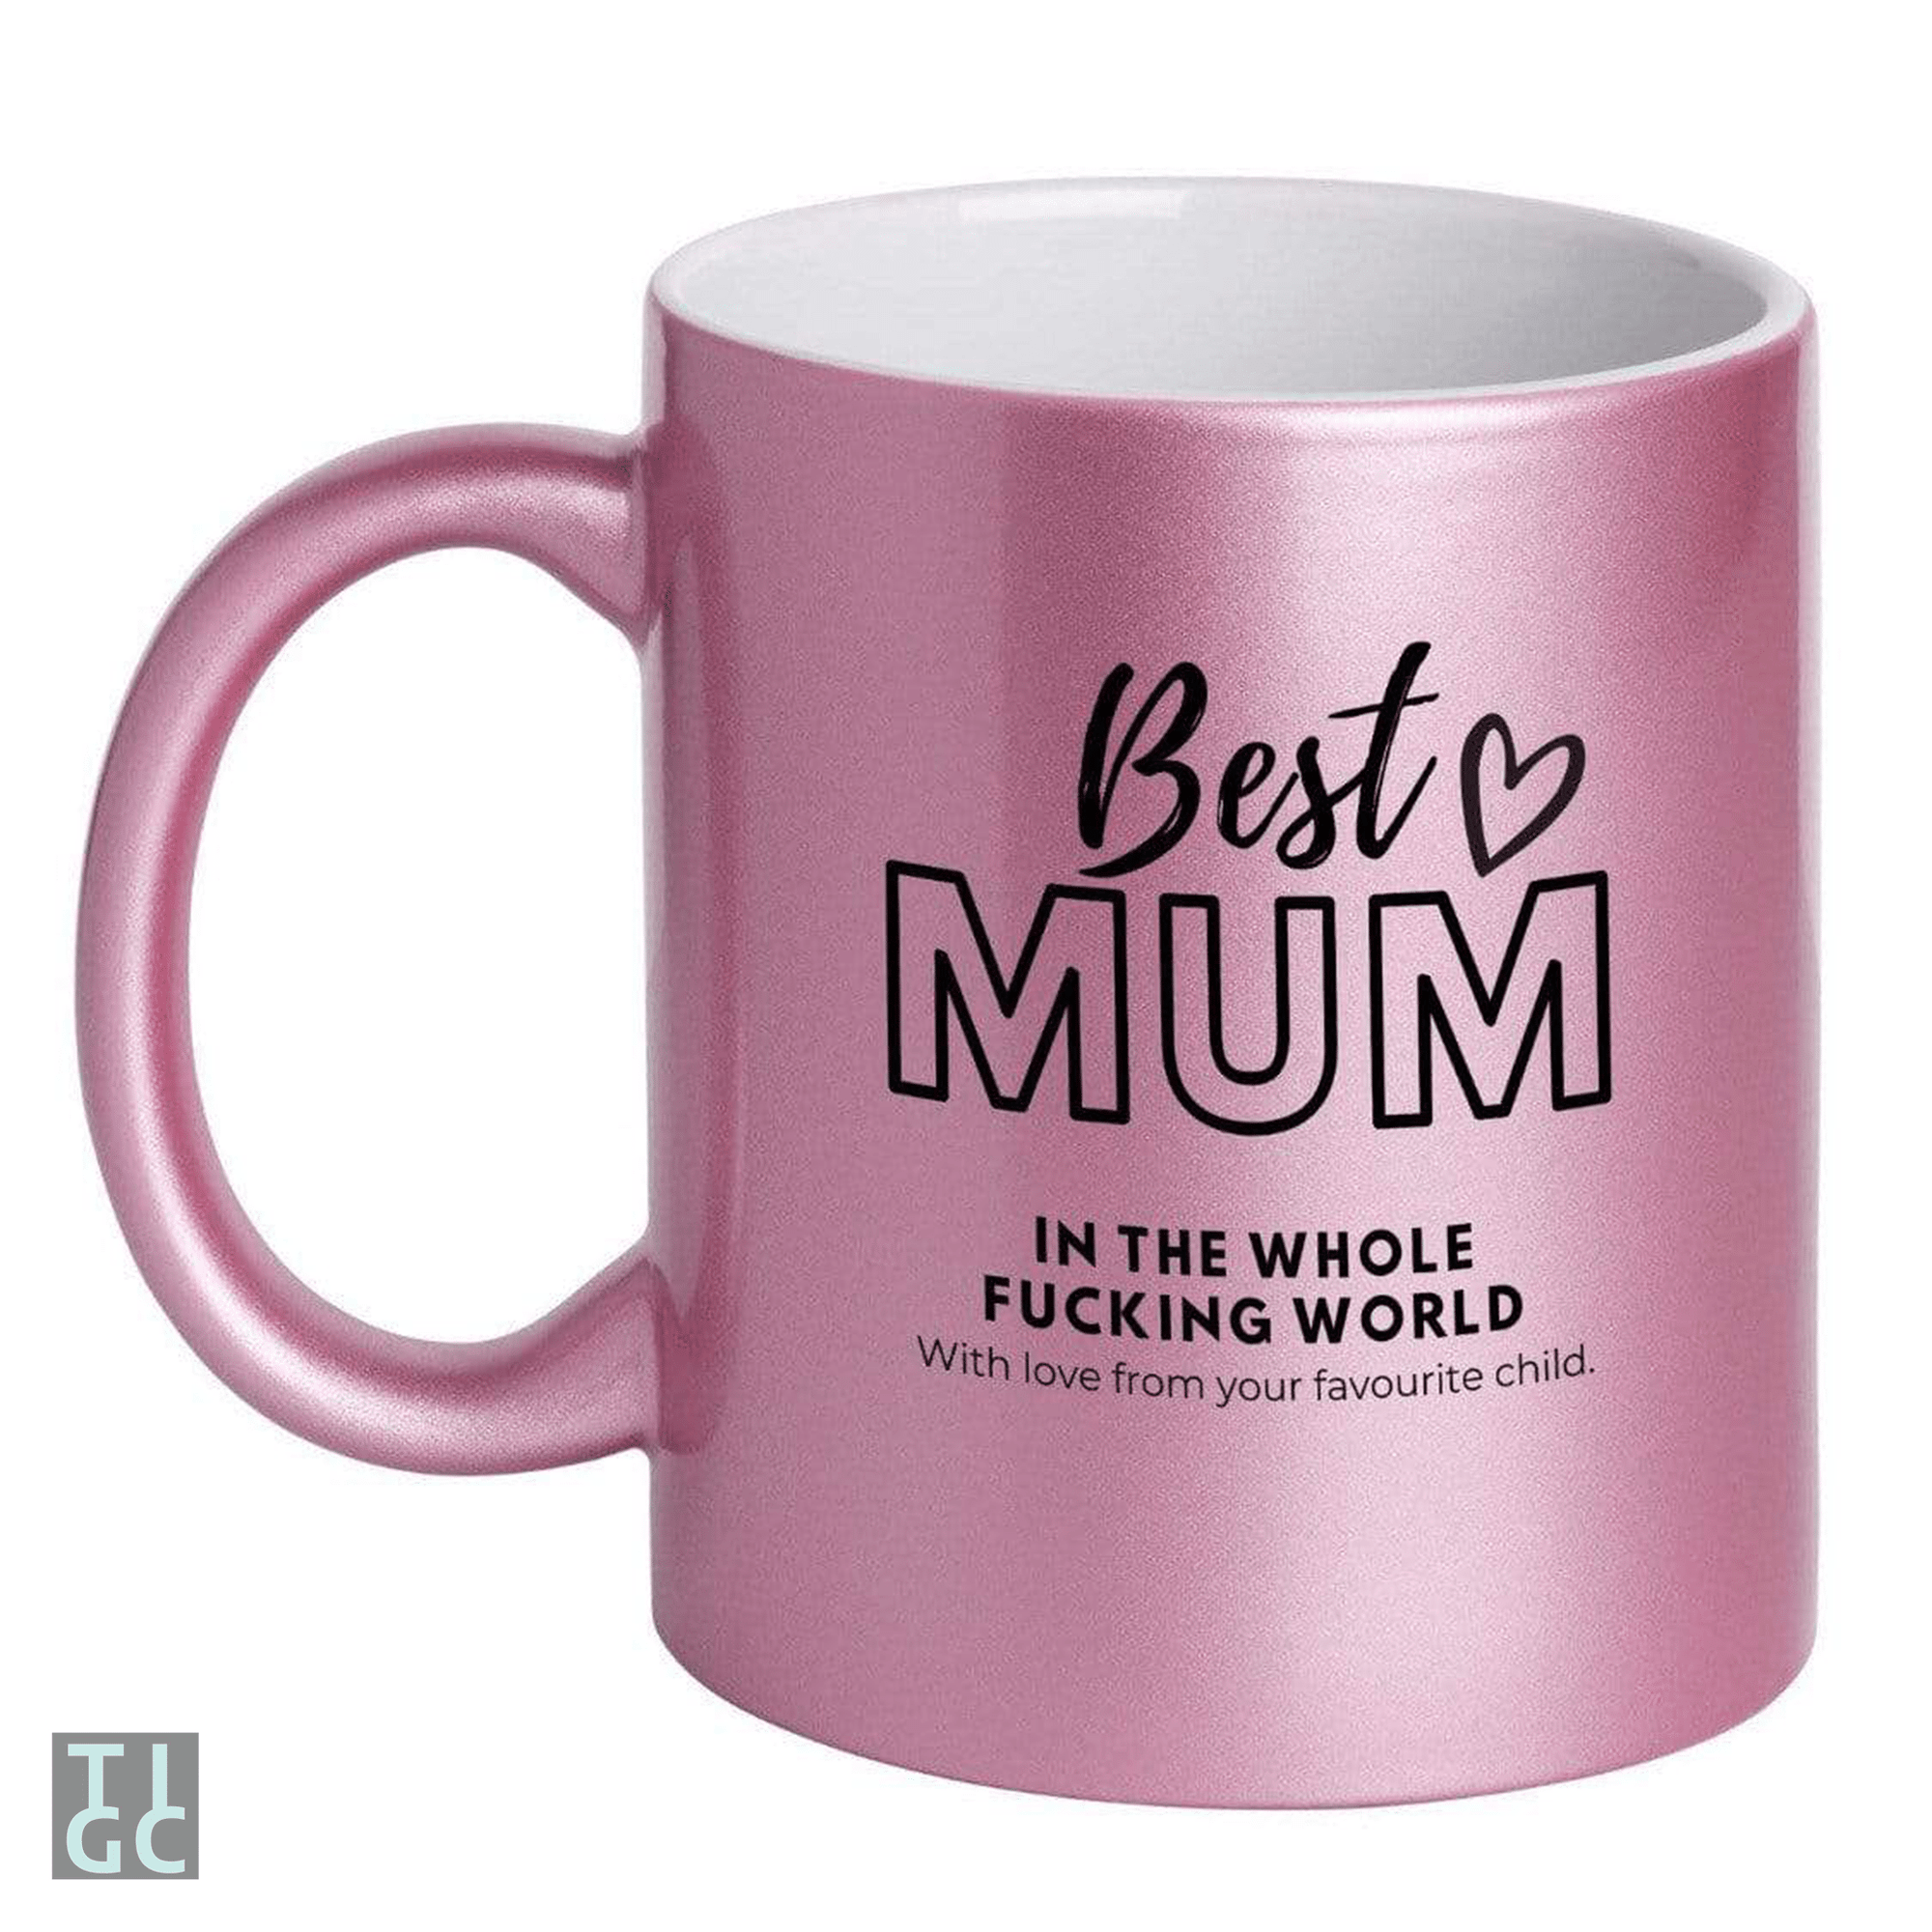 TIGC The Inappropriate Gift Co Best Mum in the Whole Fucking World Mug